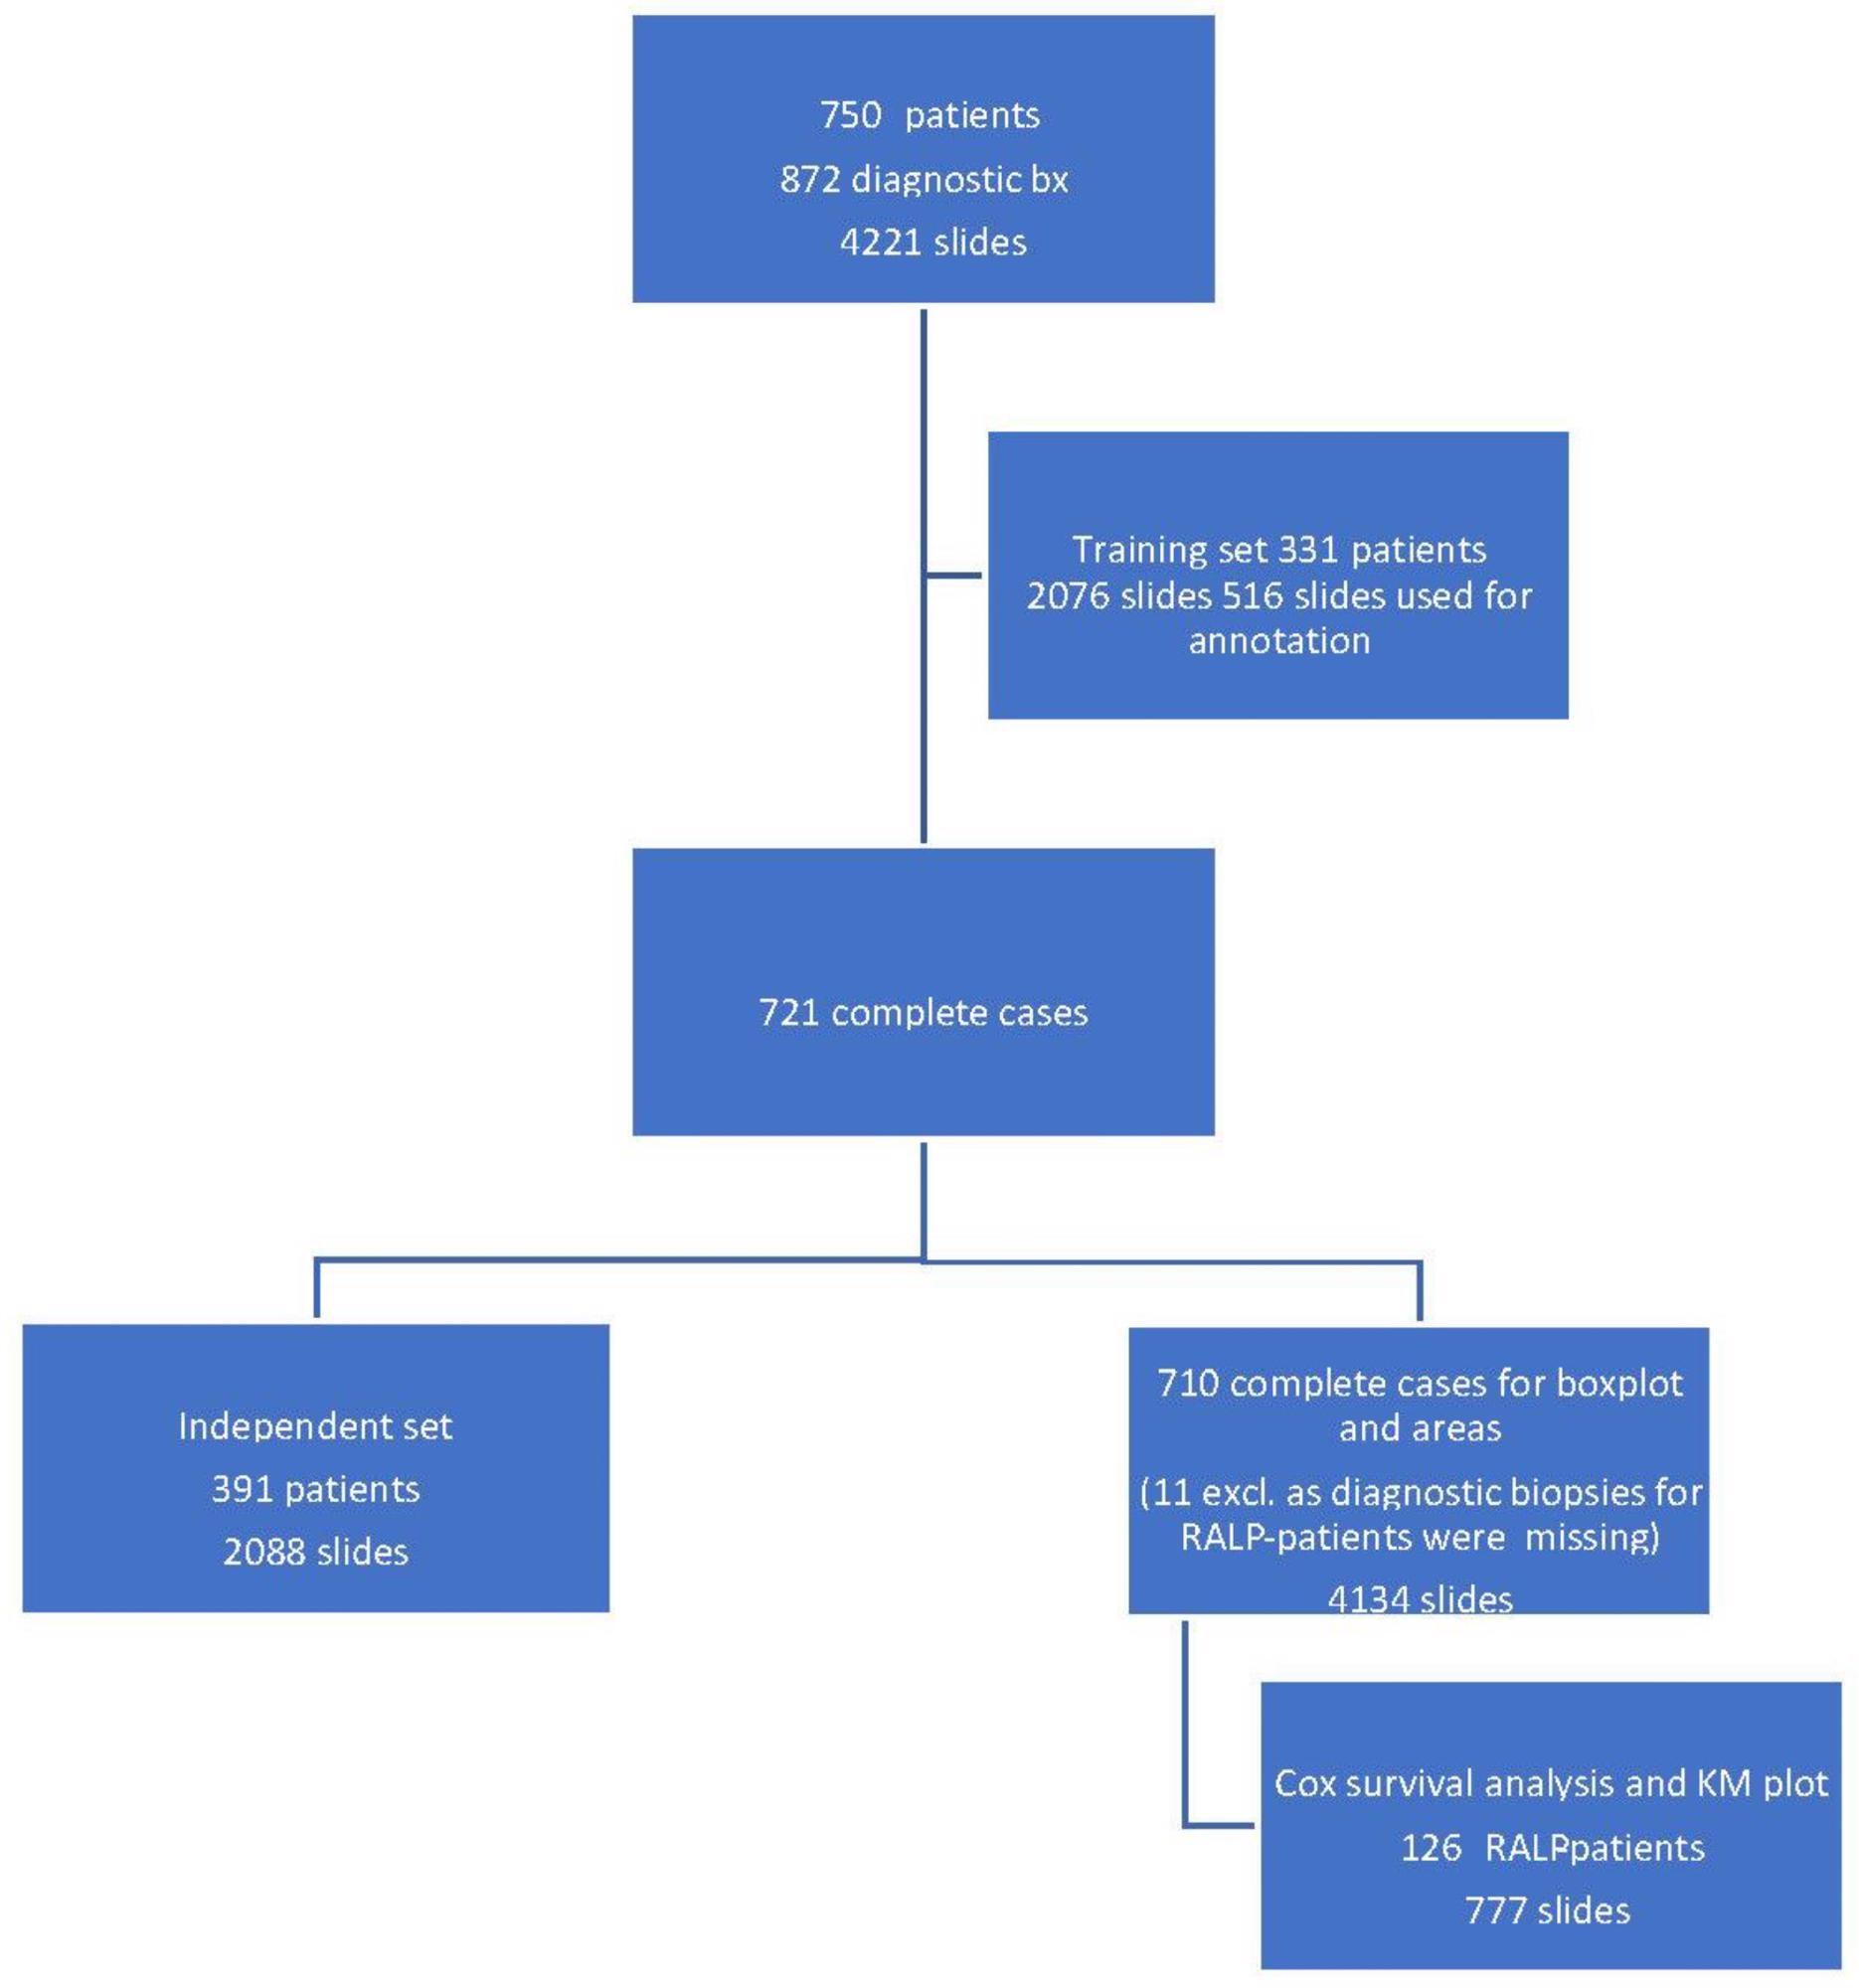 Workflow of the study cohort data selection depicting a training set, an independent set, and a radical prostatectomy (RALP) patient cohort from 872 prostate core biopsy series.